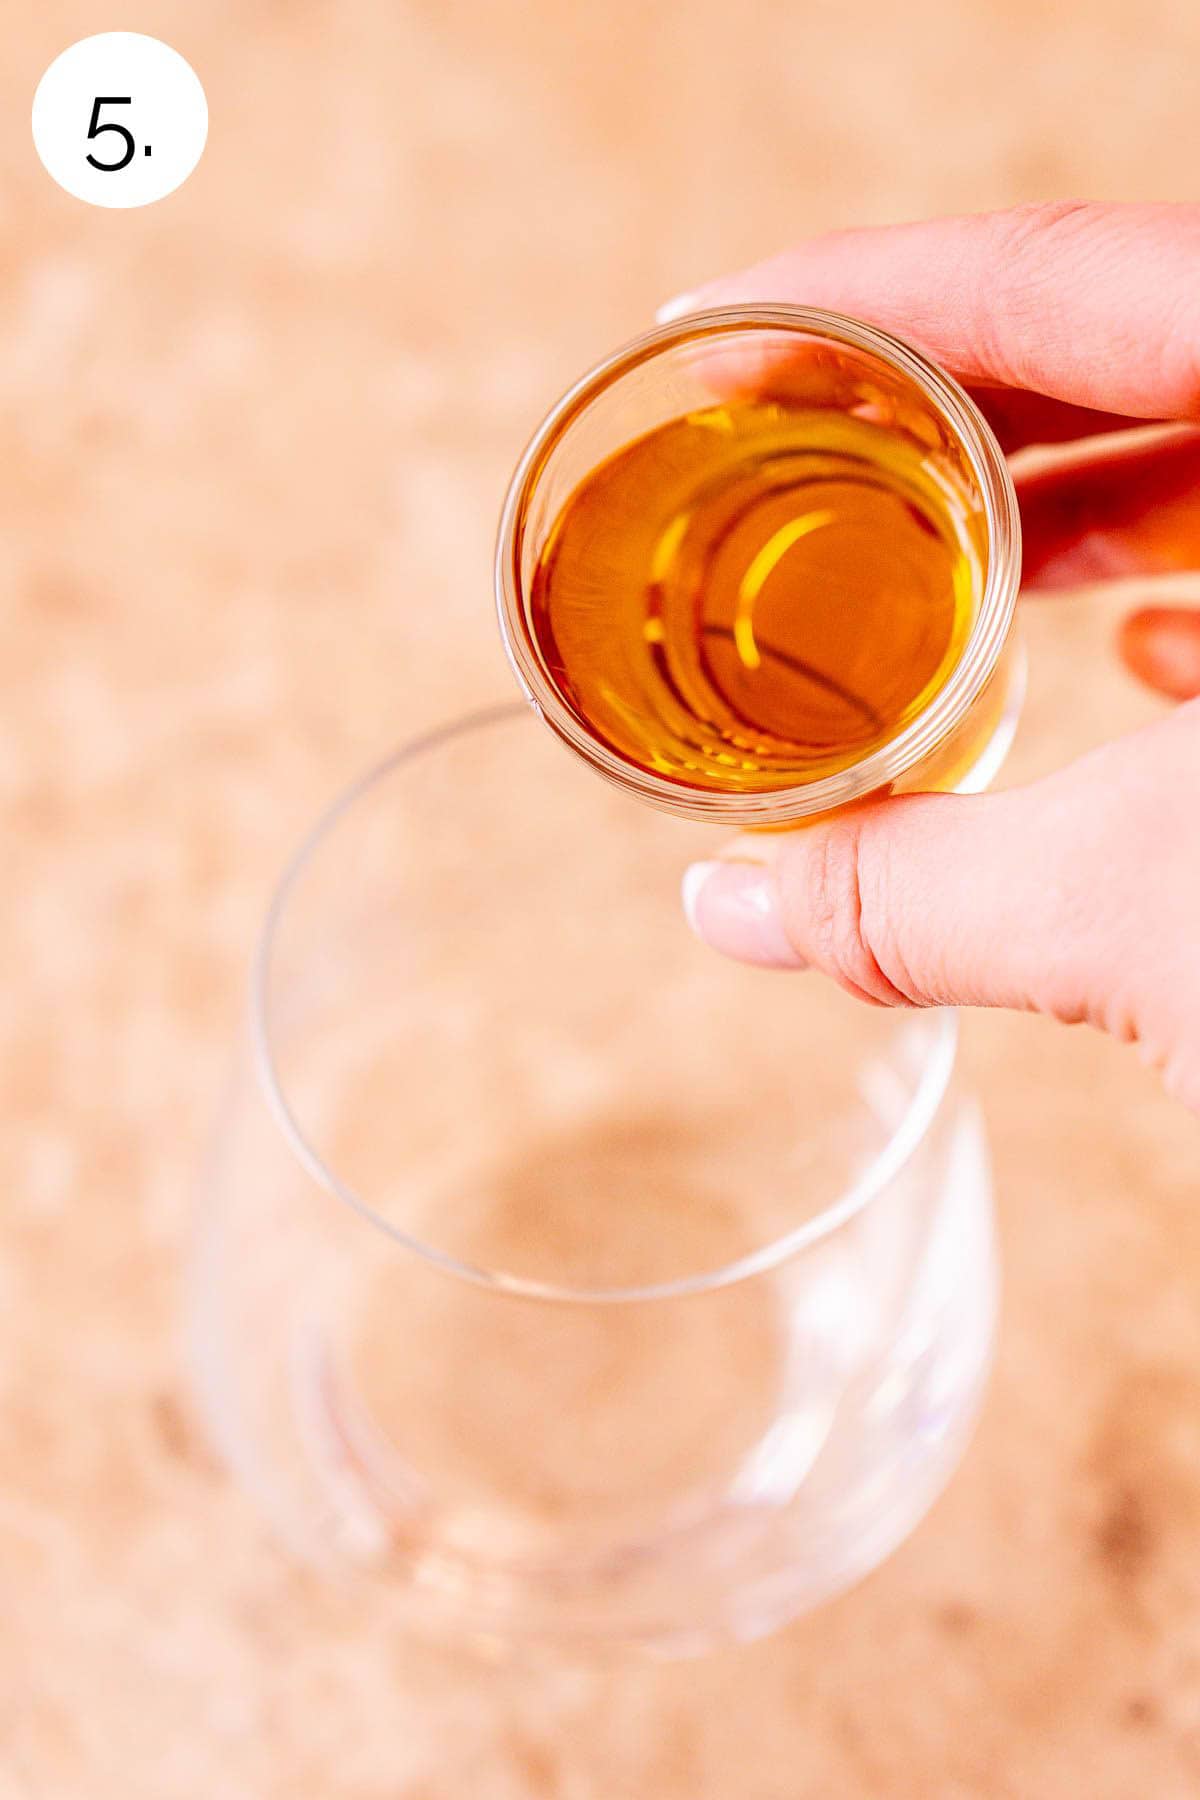 A hand pouring a shot of bourbon into an old fashioned glass on a cream-colored tile surface.